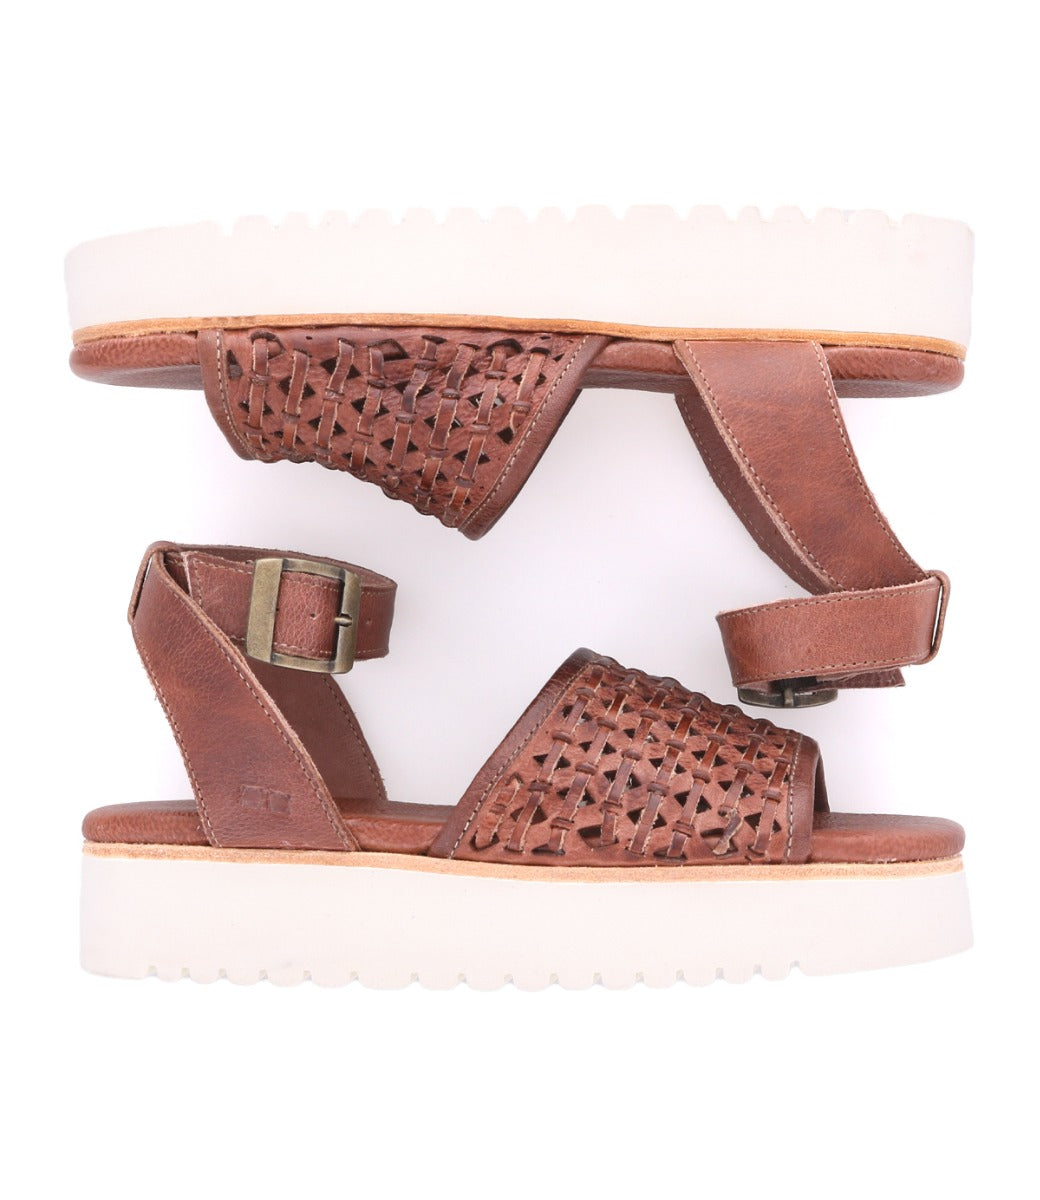 A pair of Brisa women's brown sandals from Bed Stu.